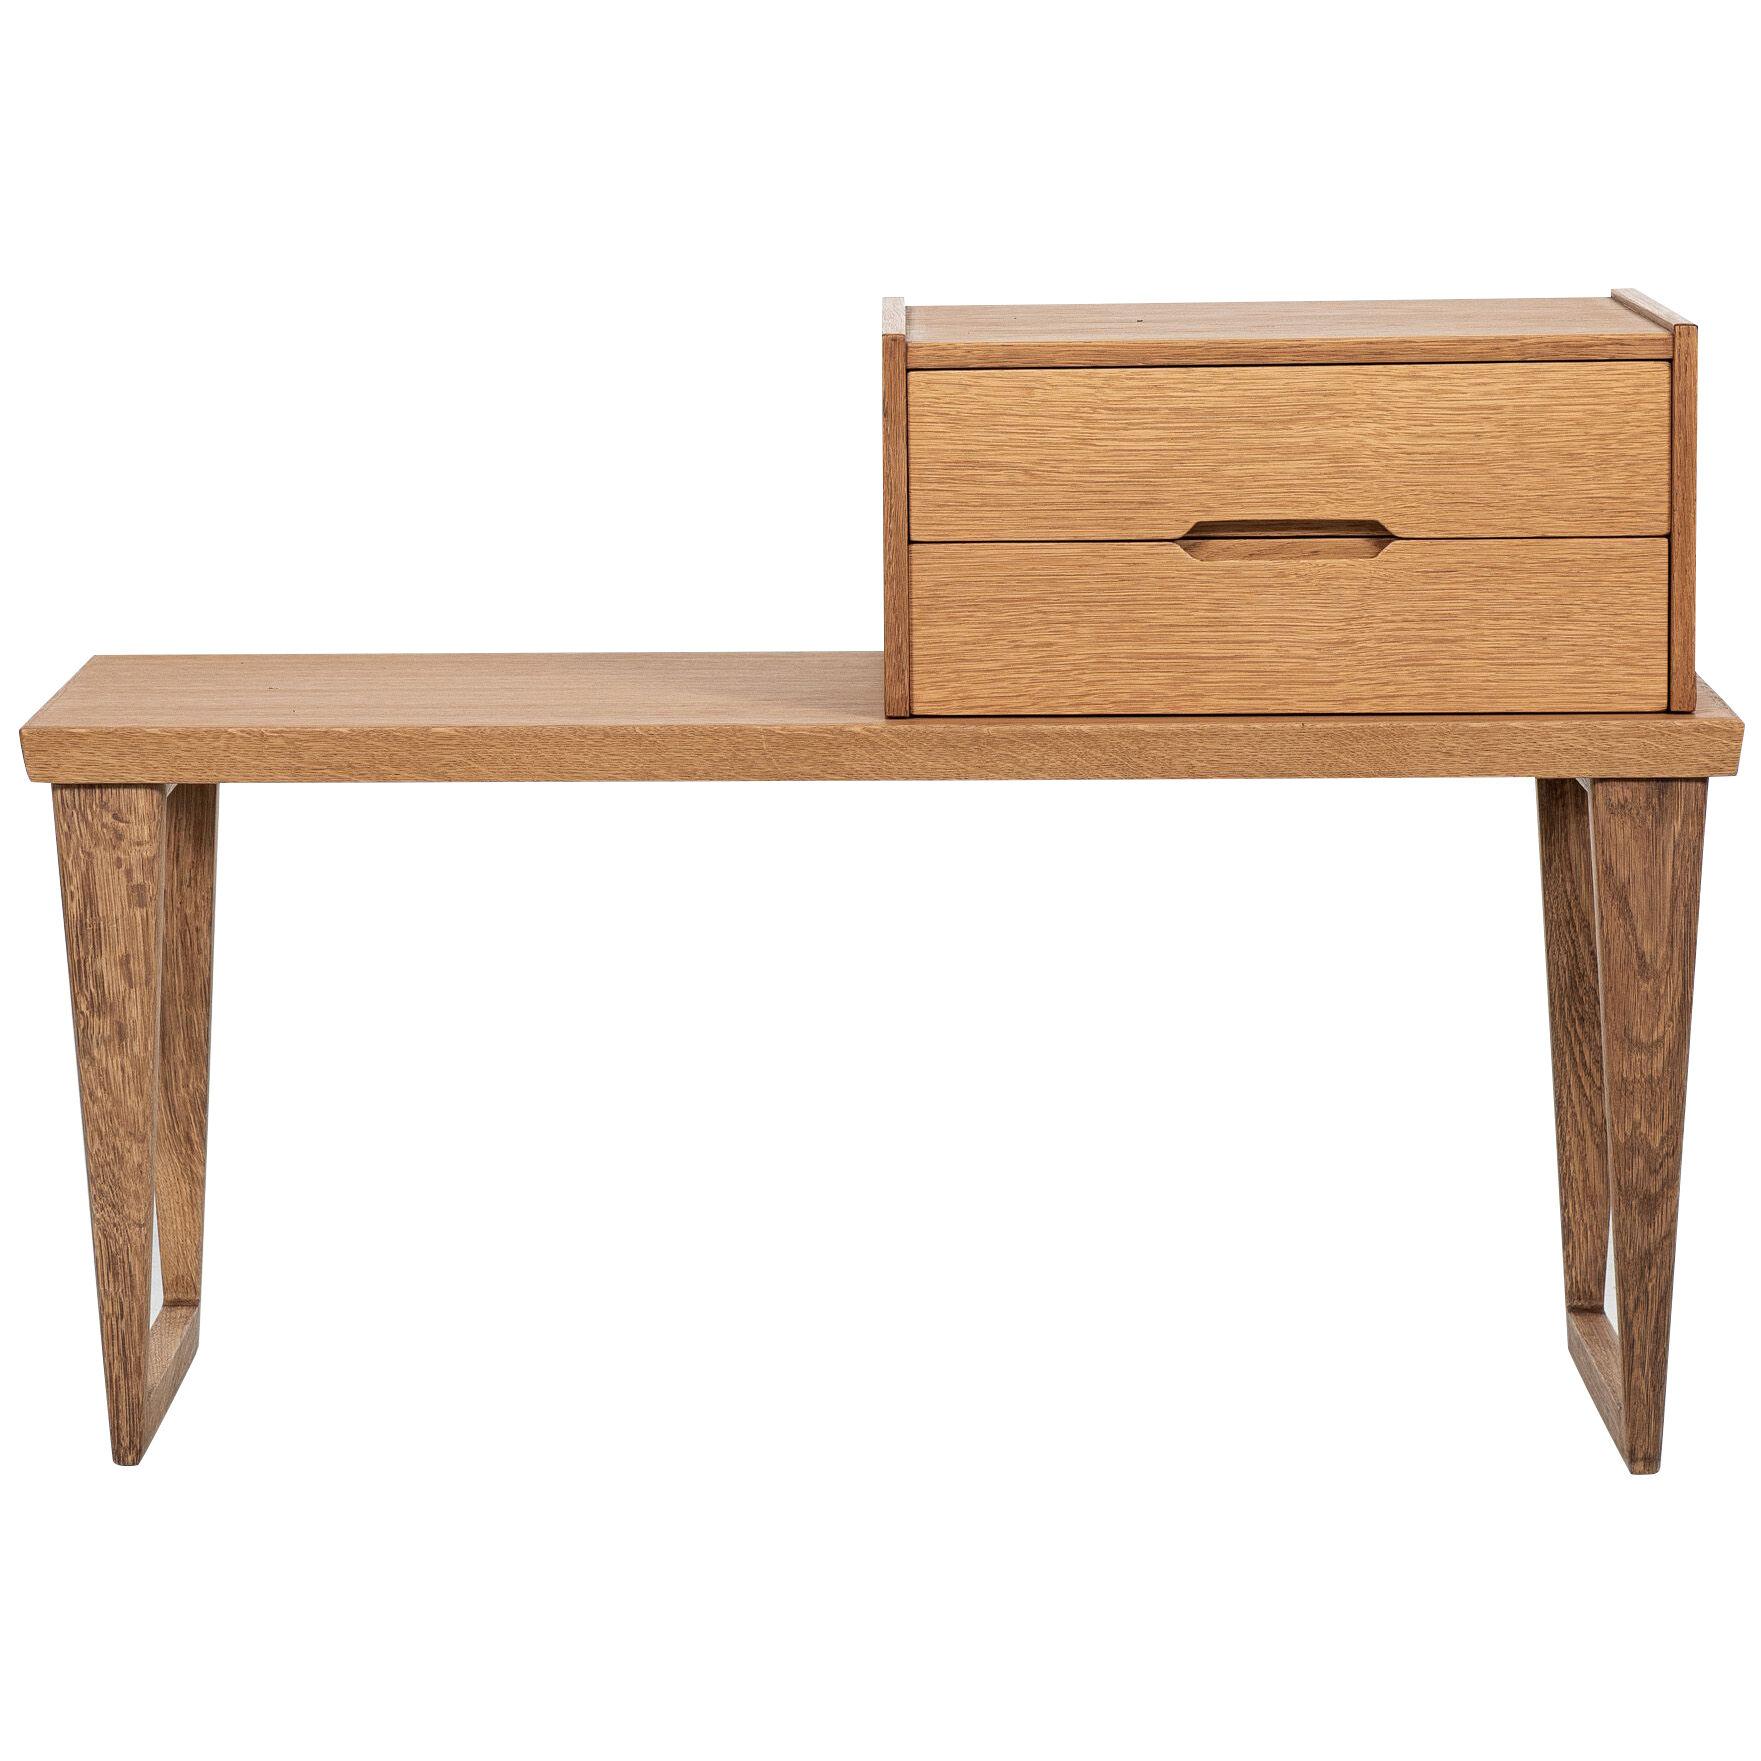 Midcentury Danish bench and container in oak by Aksel Kjersgaard 1960s